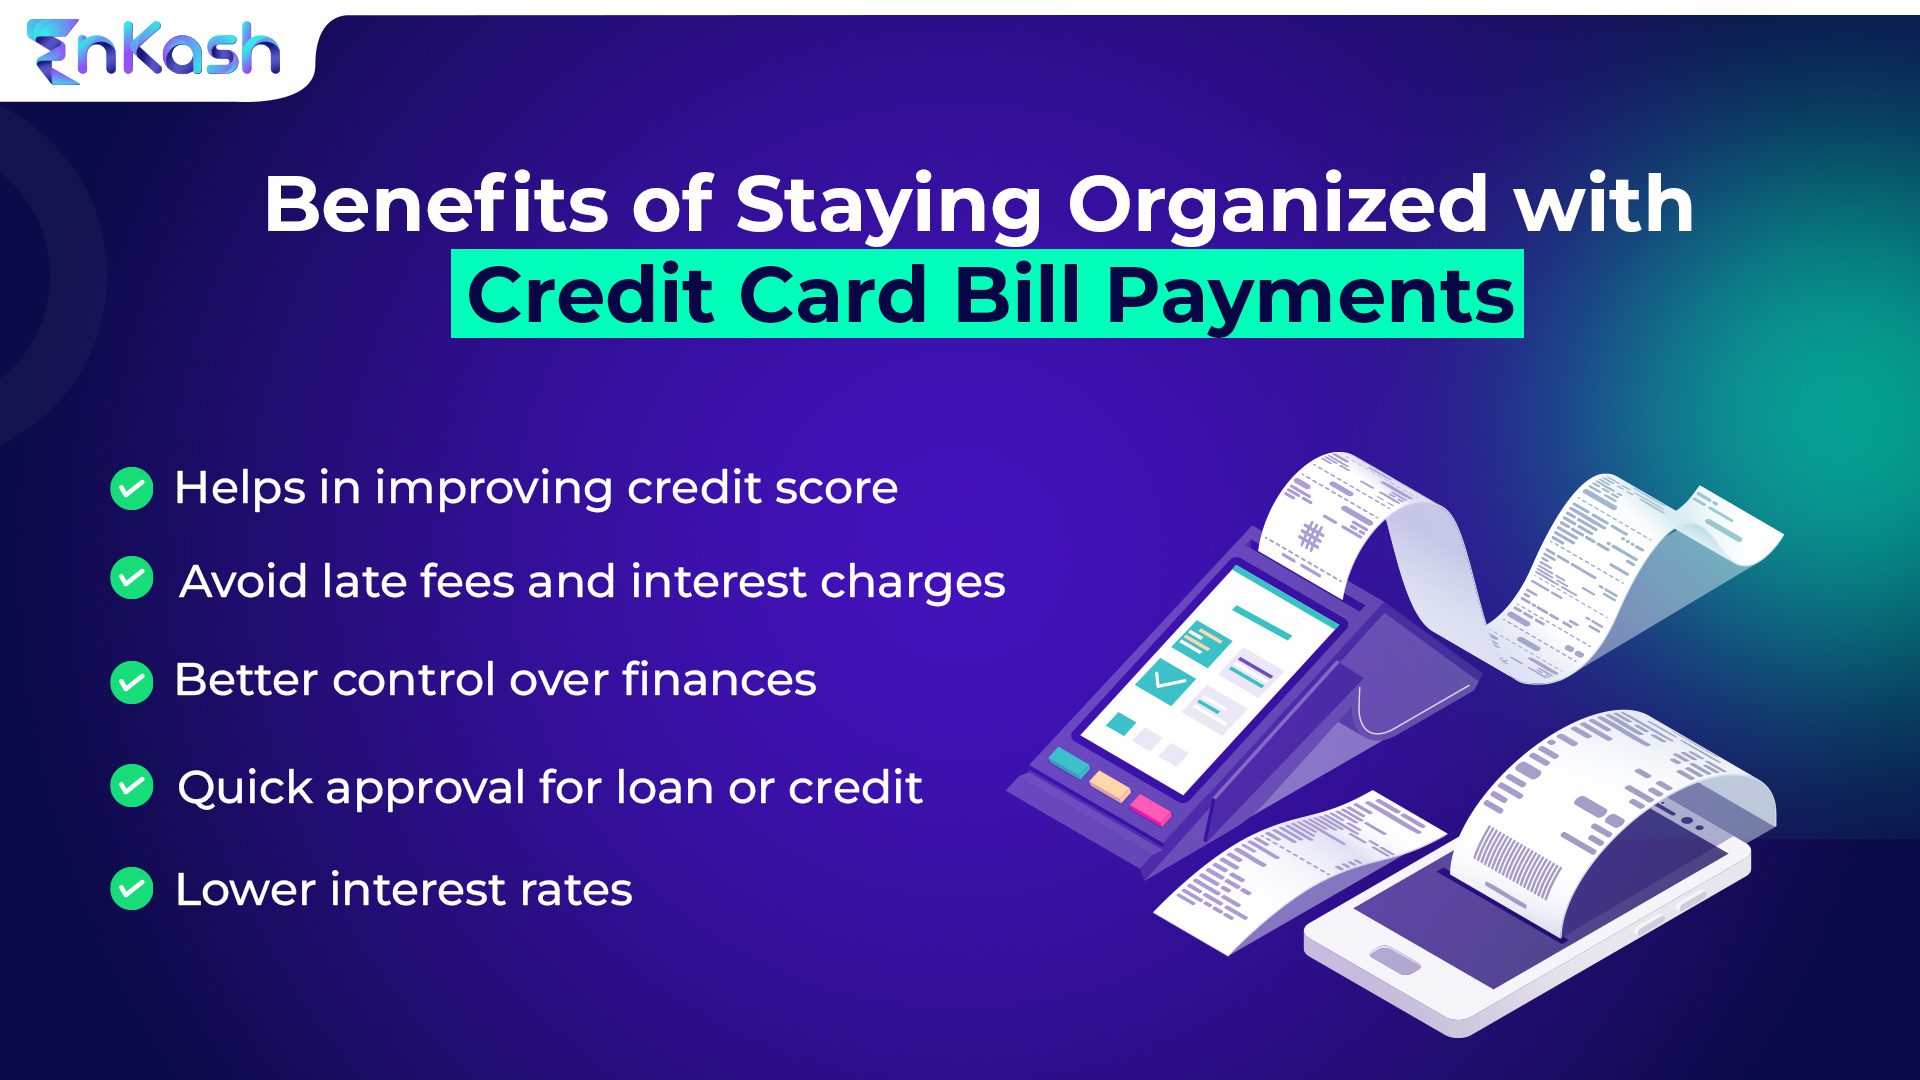 Benefits of Staying Organized with Credit Card Bill Payments